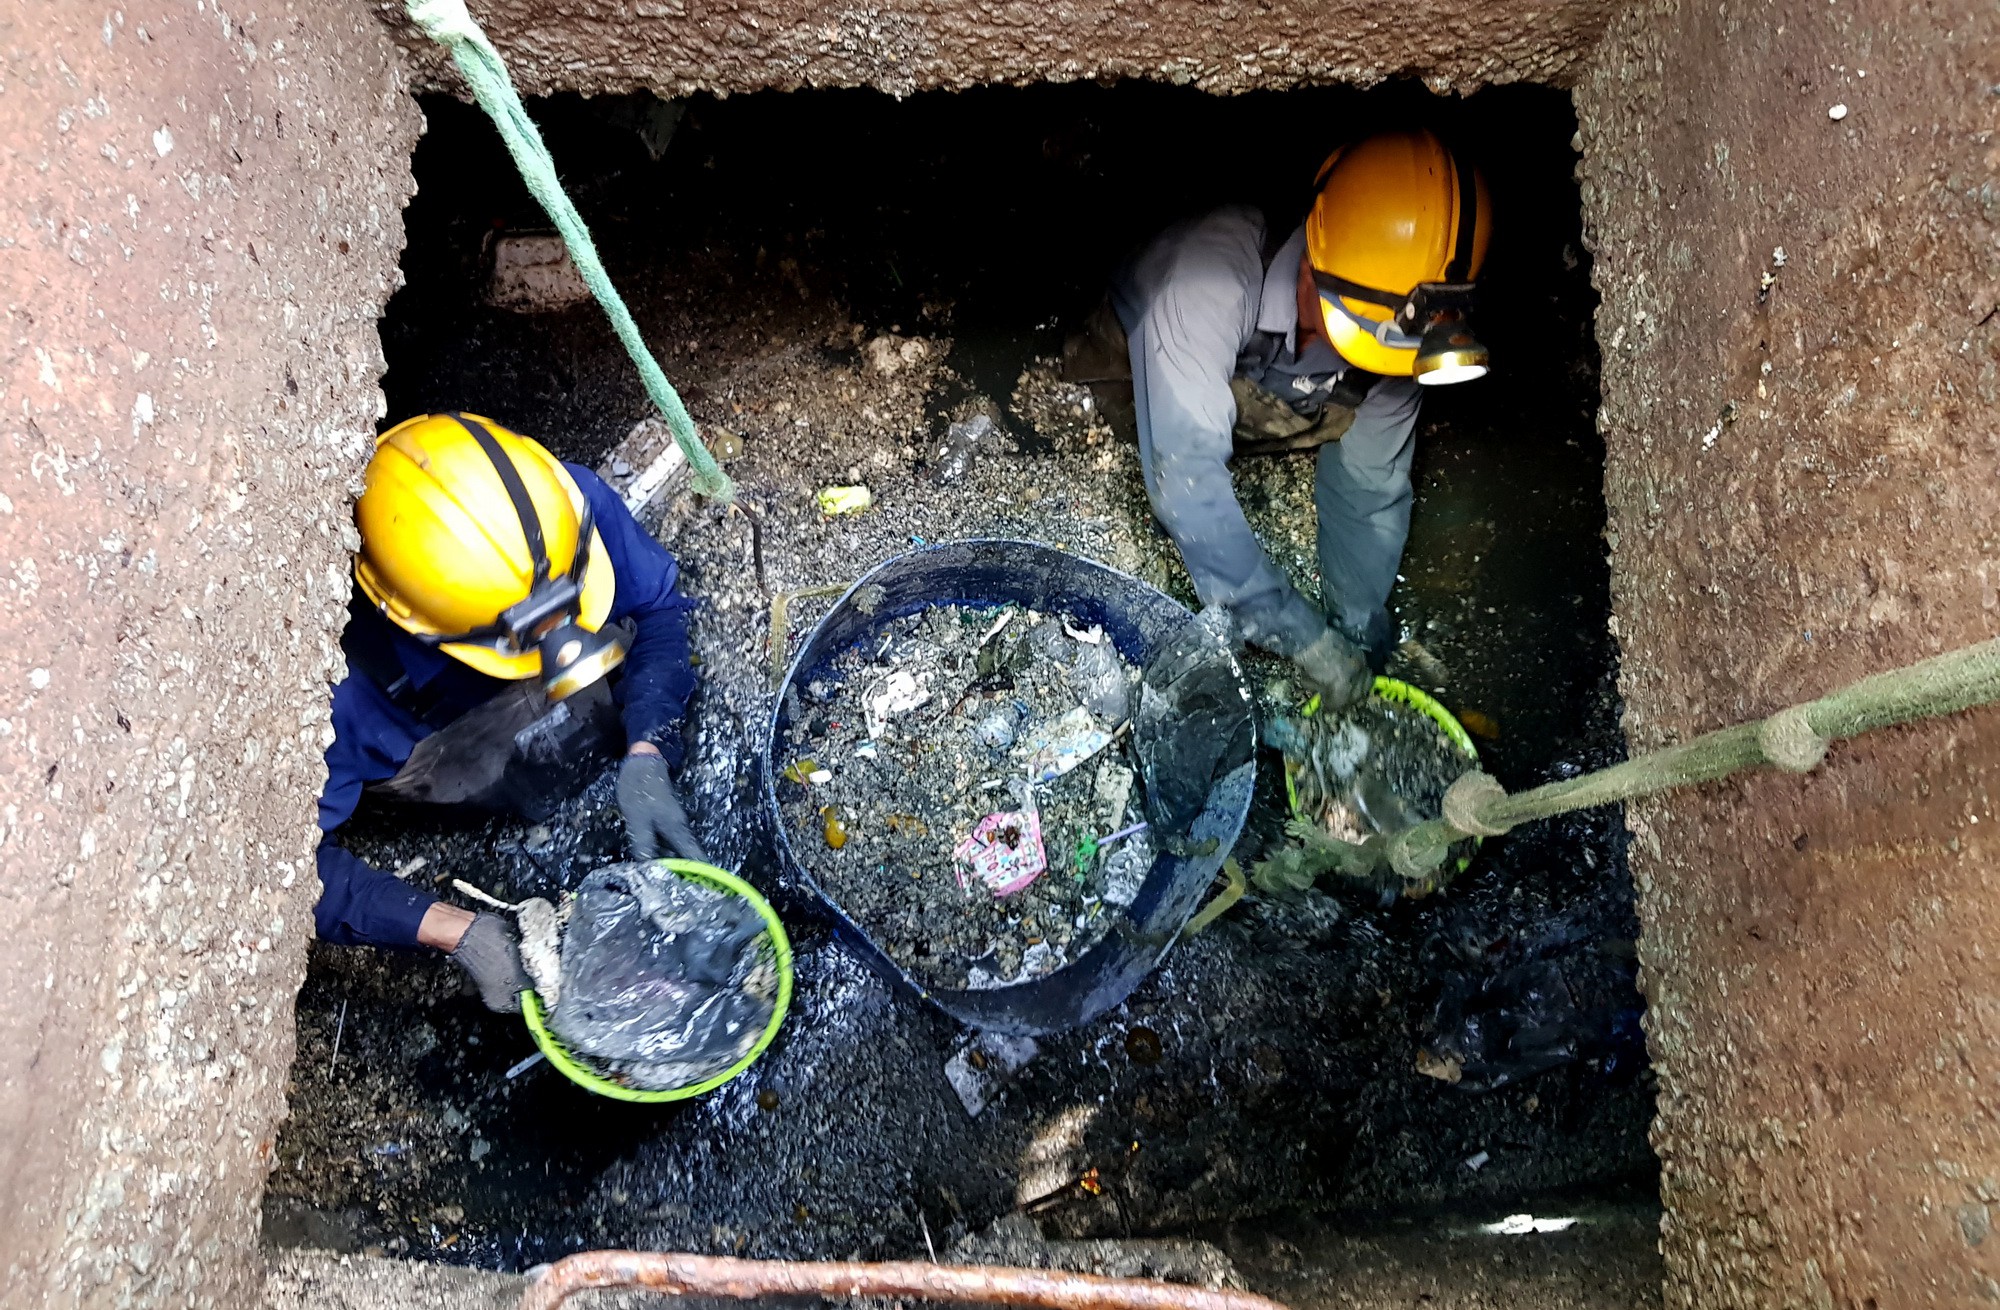 Drainage workers collect garbage in a sewage pipe in Ho Chi Minh City, Vietnam. Photo: Tuoi Tre